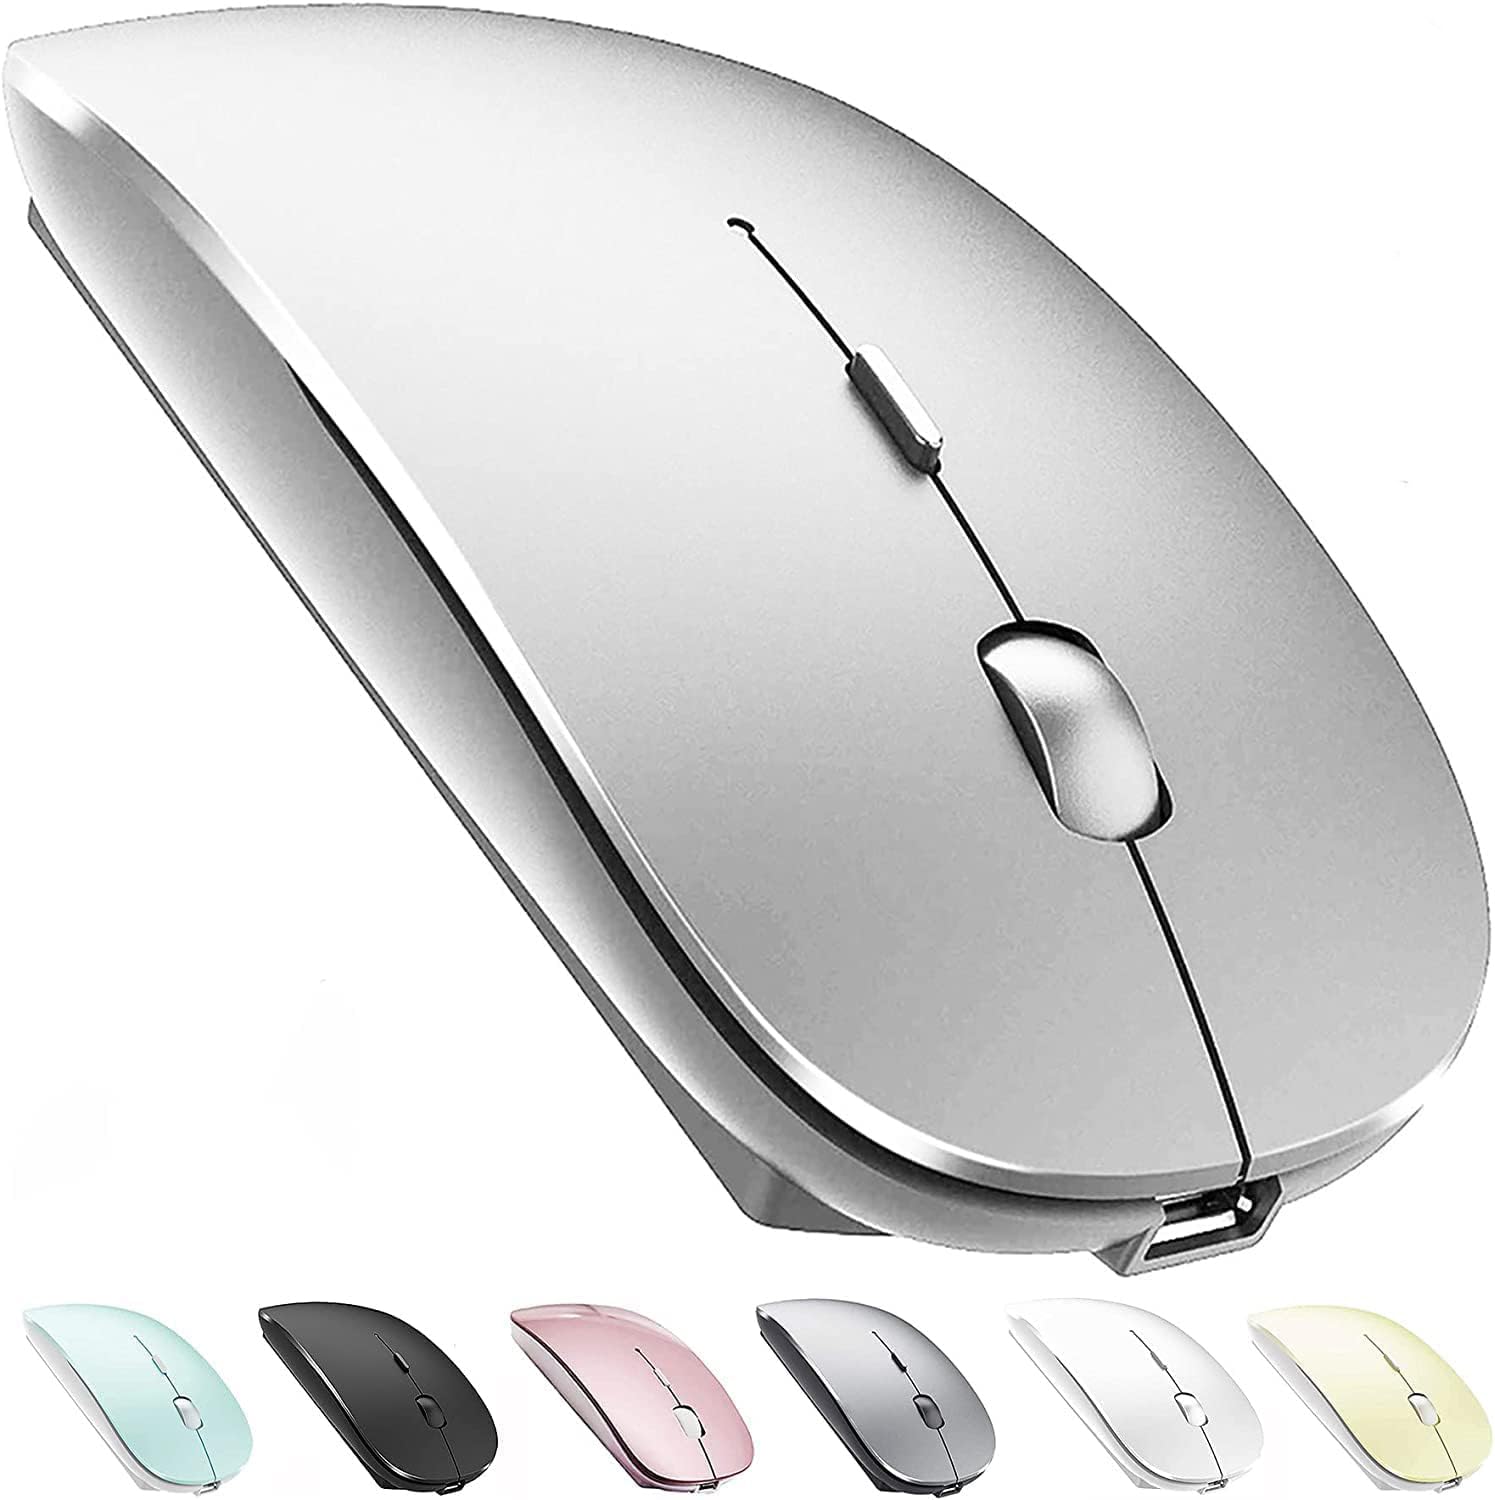 A disconnected wireless mouse icon.